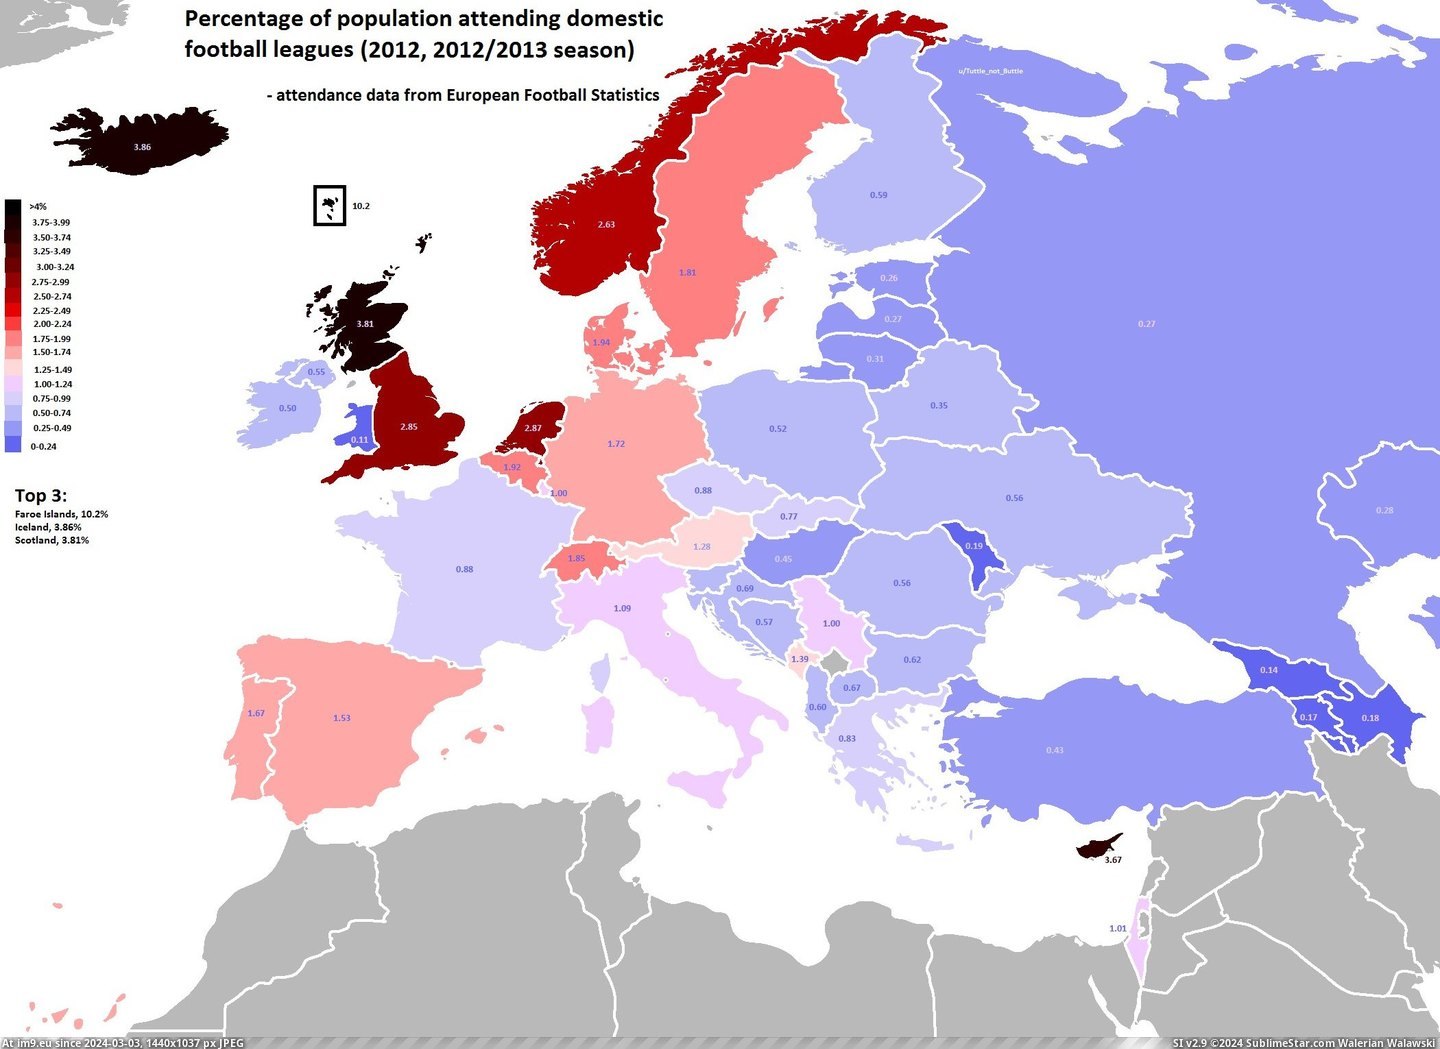 #Europe #Population #Football #2100x1525 #Domestic #Leagues #Watching #Percentage #Soccer [Mapporn] Percentage of population watching domestic football-soccer leagues in Europe. [2100x1525] Pic. (Изображение из альбом My r/MAPS favs))